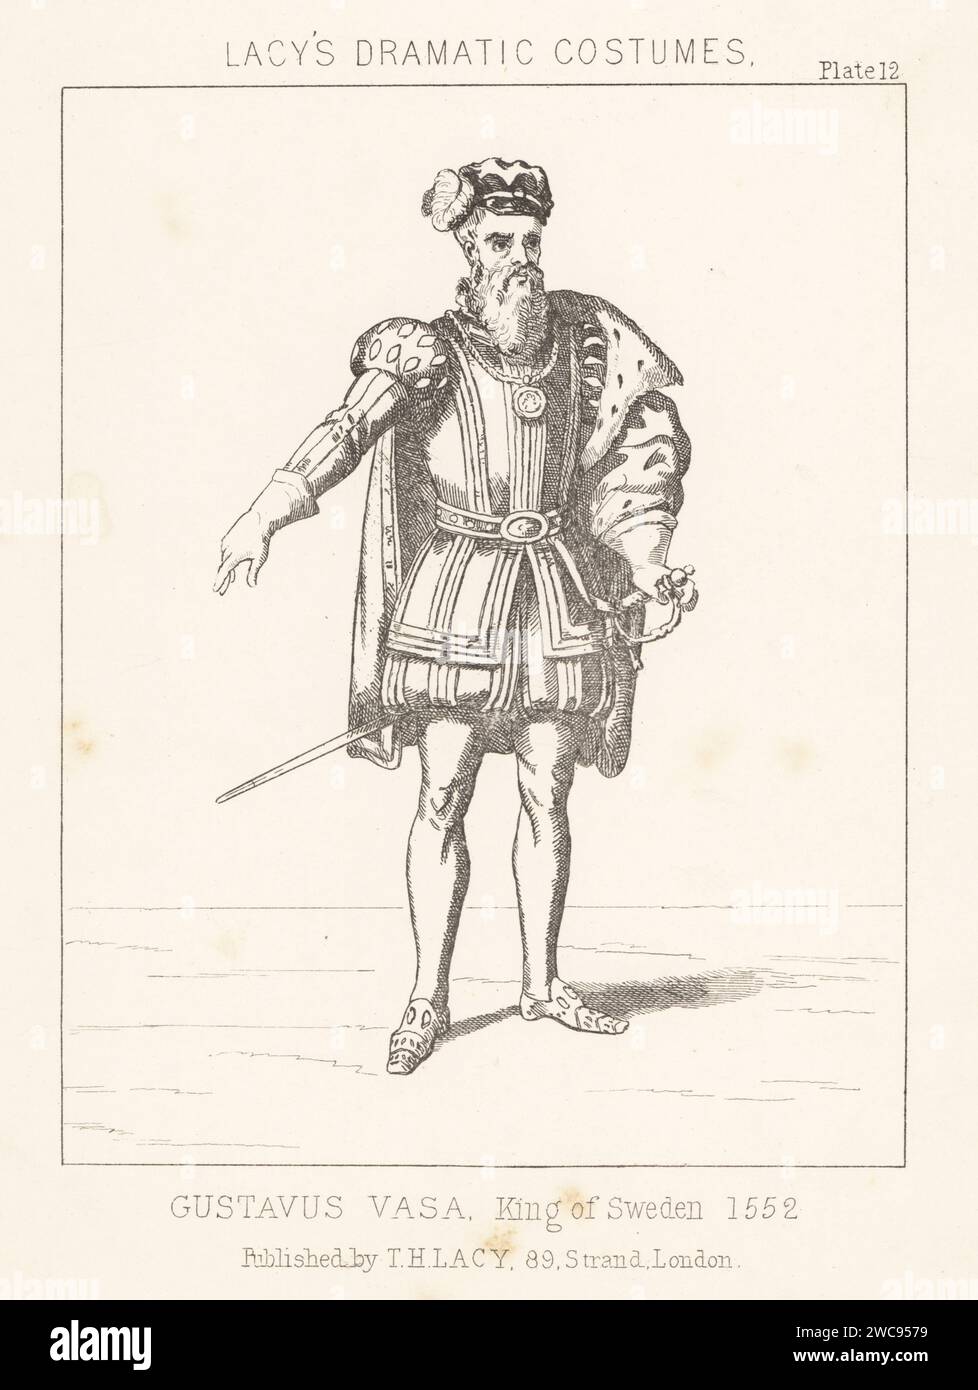 Gustav I, Gustavus Vasa, King of Sweden, 1496-1560. In plumed cap, ermine-lined short cape, quilted doublet and breeches, hose, with court sword. Lithograph from Thomas Hailes Lacy's Male Costumes, Historical, National and Dramatic in 200 Plates, London, 1865. Lacy (1809-1873) was a British actor, playwright, theatrical manager and publisher. Stock Photo